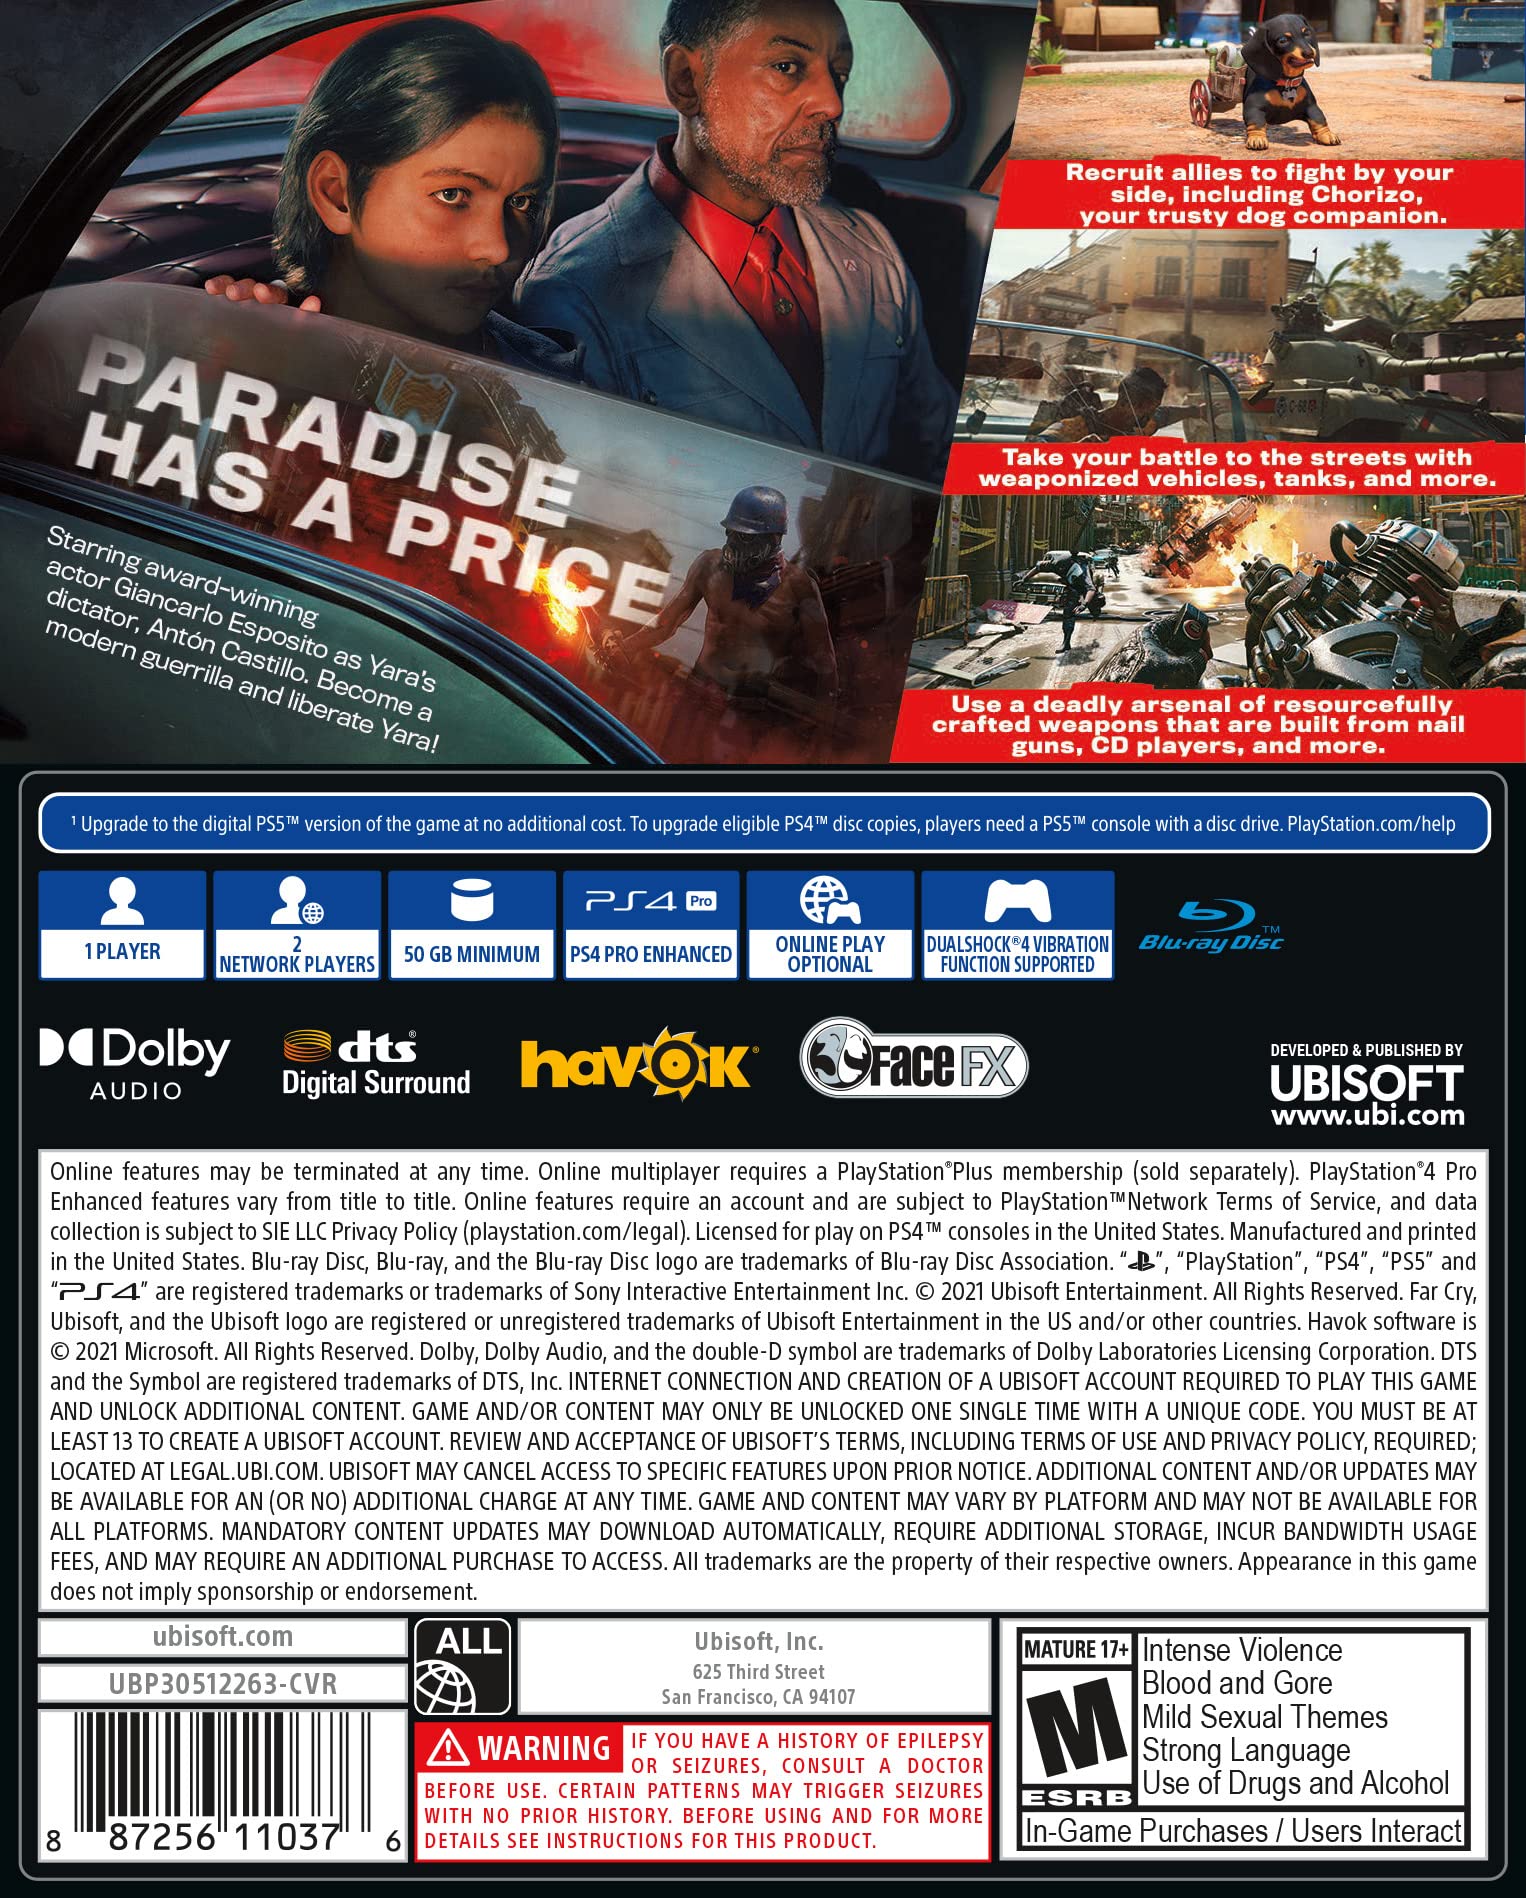 Far Cry 6 PlayStation 4 Standard Edition with Free Upgrade to the Digital PS5 Version